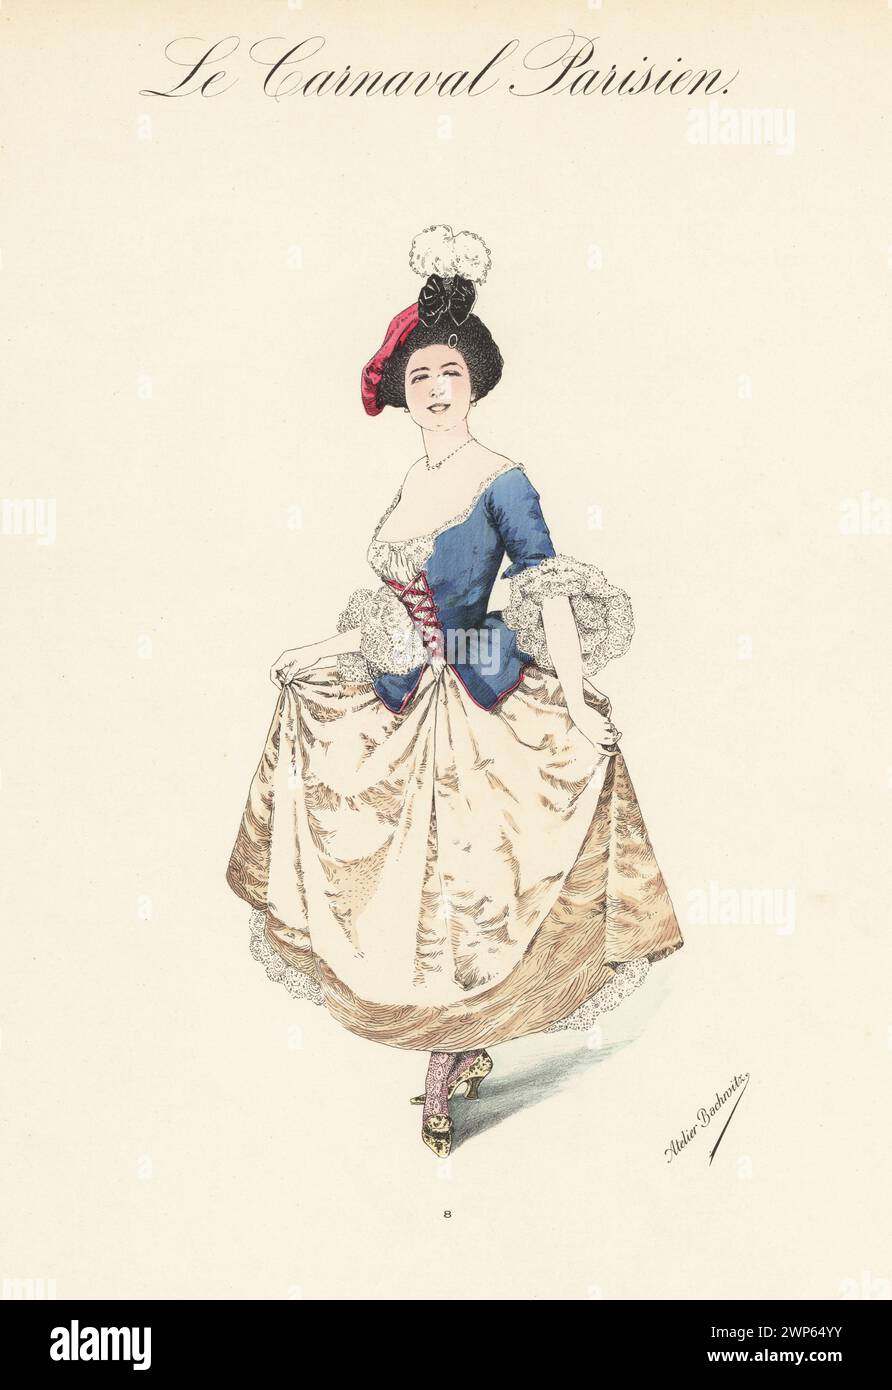 Woman in fancy-dress costume of the French Revolution. She wears a bonnet with cockade, blue bodice with red laced front, white blouse with lace cuffs, full skirts and apron. Handcoloured lithograph by Atelier Bachwitz from Le Carnaval Parisien (Parisian Carnival), Atelier Bachwitz AG, Vienna, 1925. Stock Photo